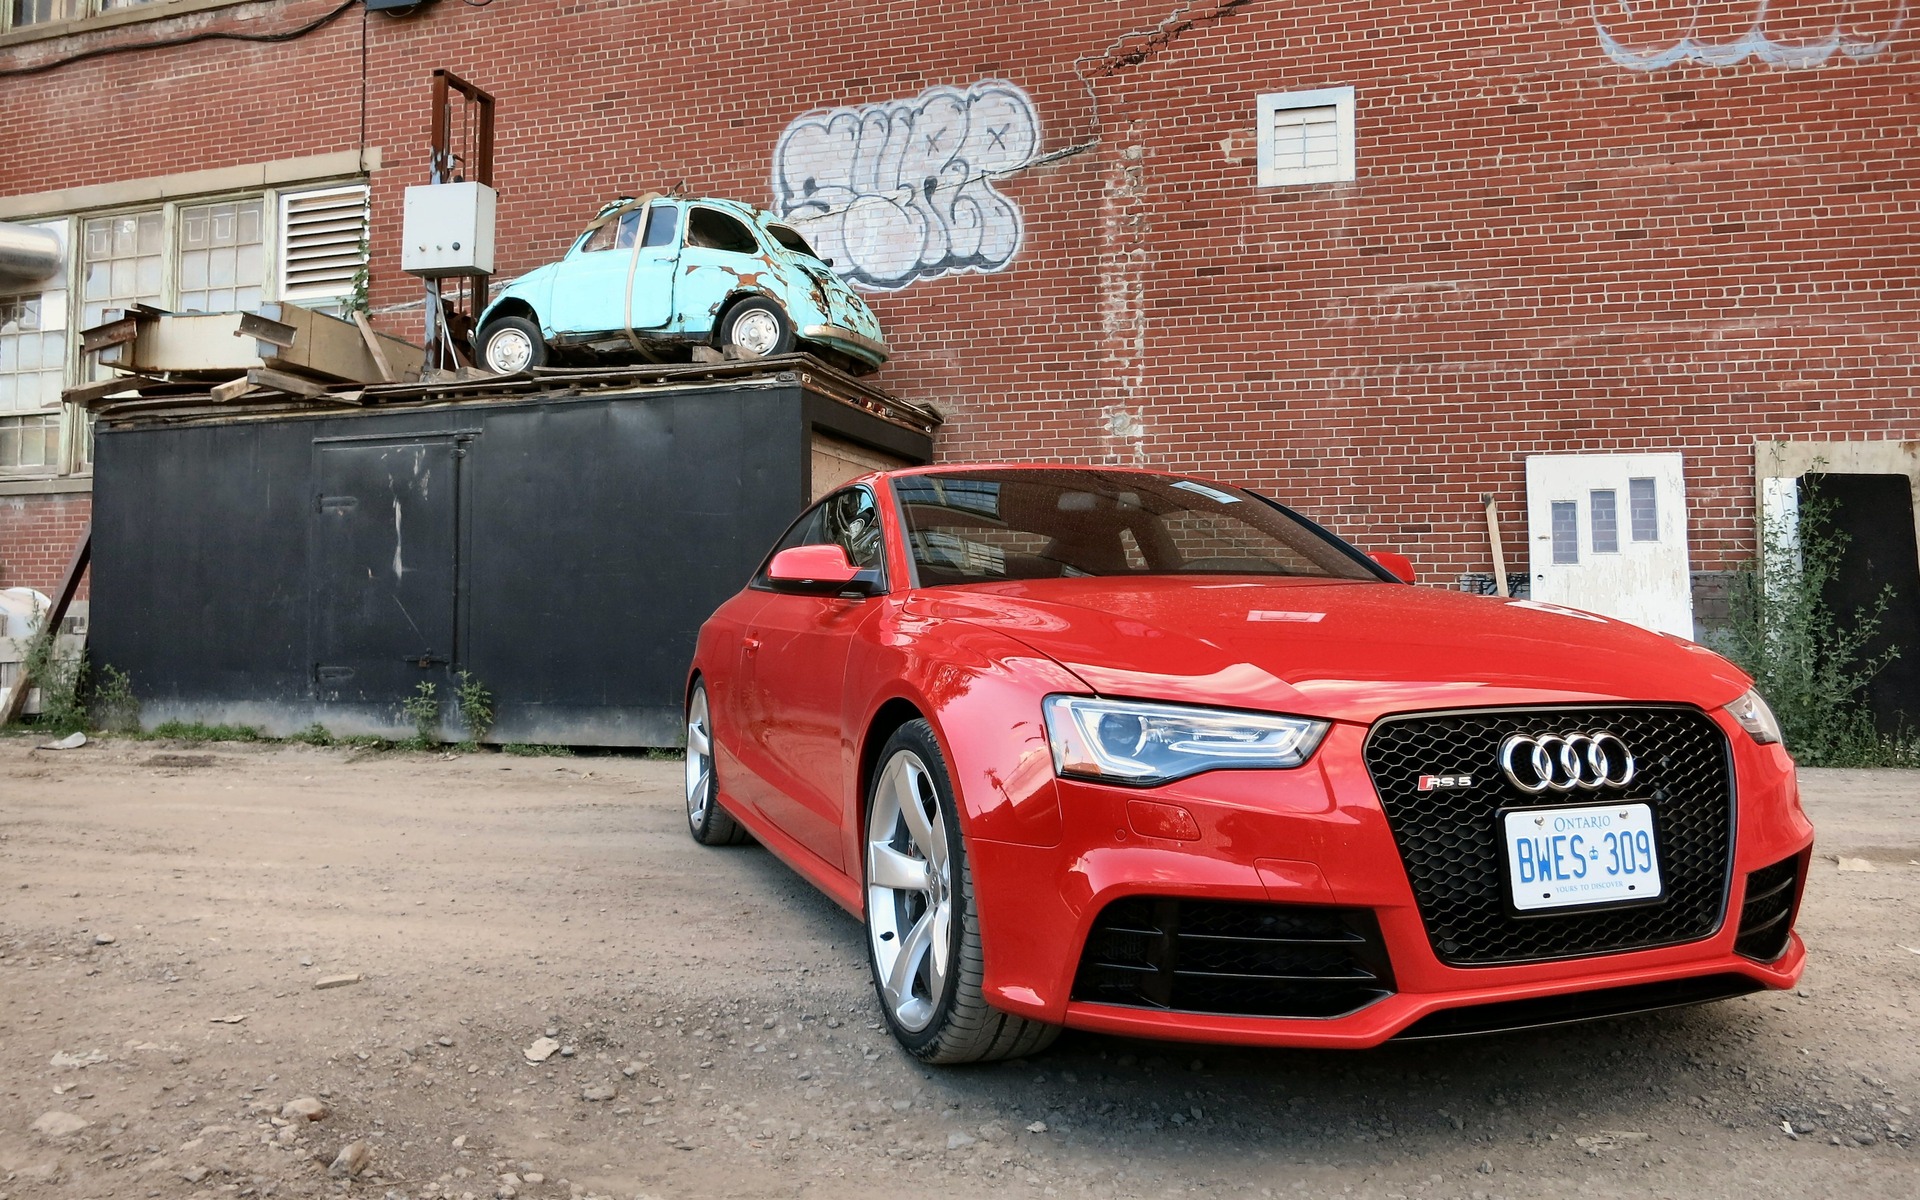 If you're tired of turbos, snag an RS 5 before it’s too late.